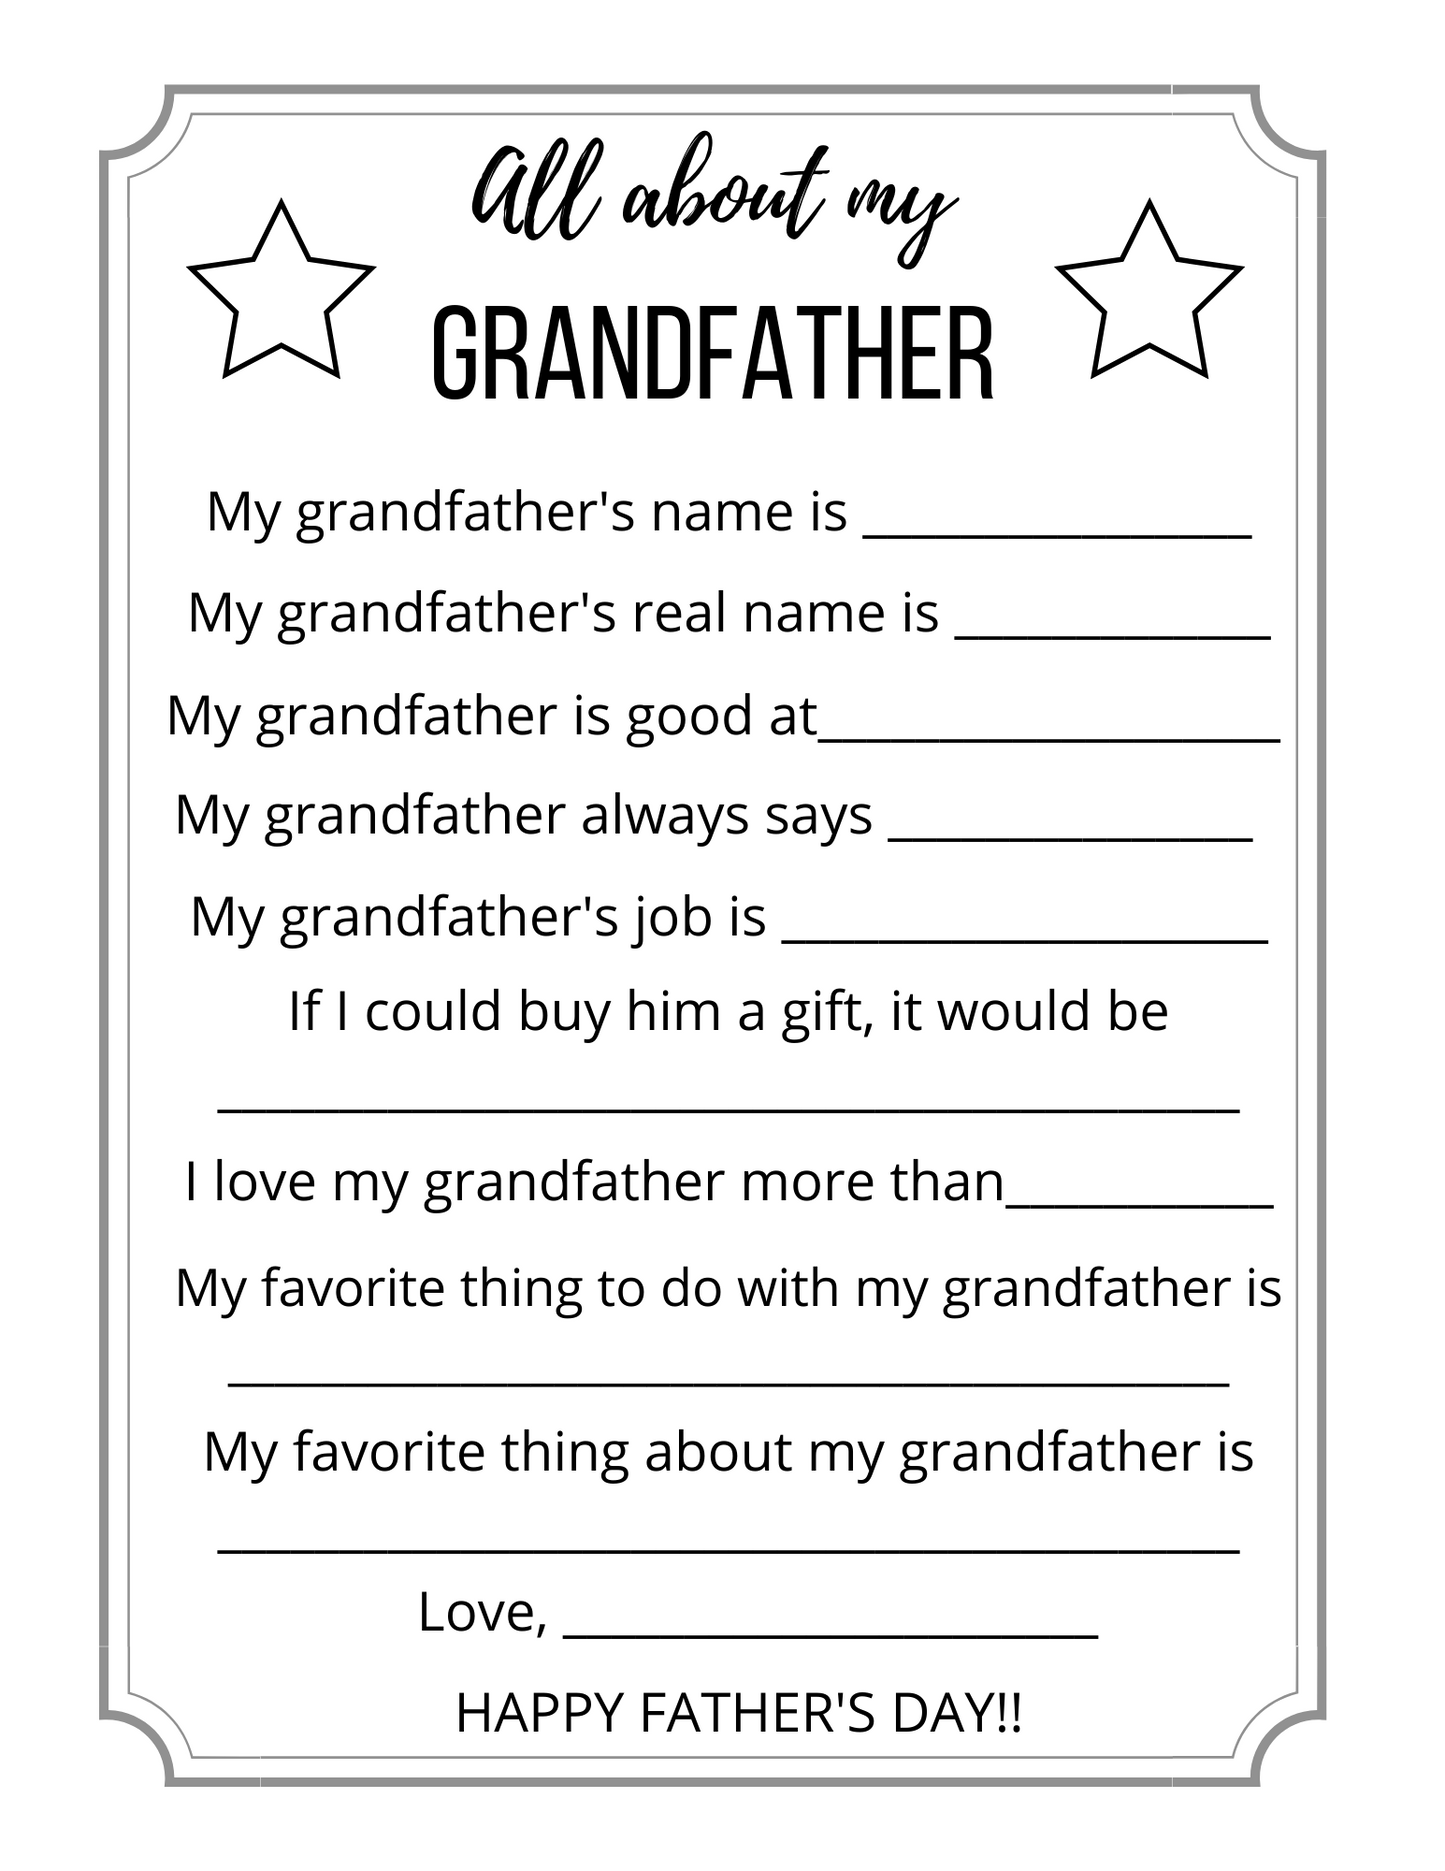 All About My Grandfather